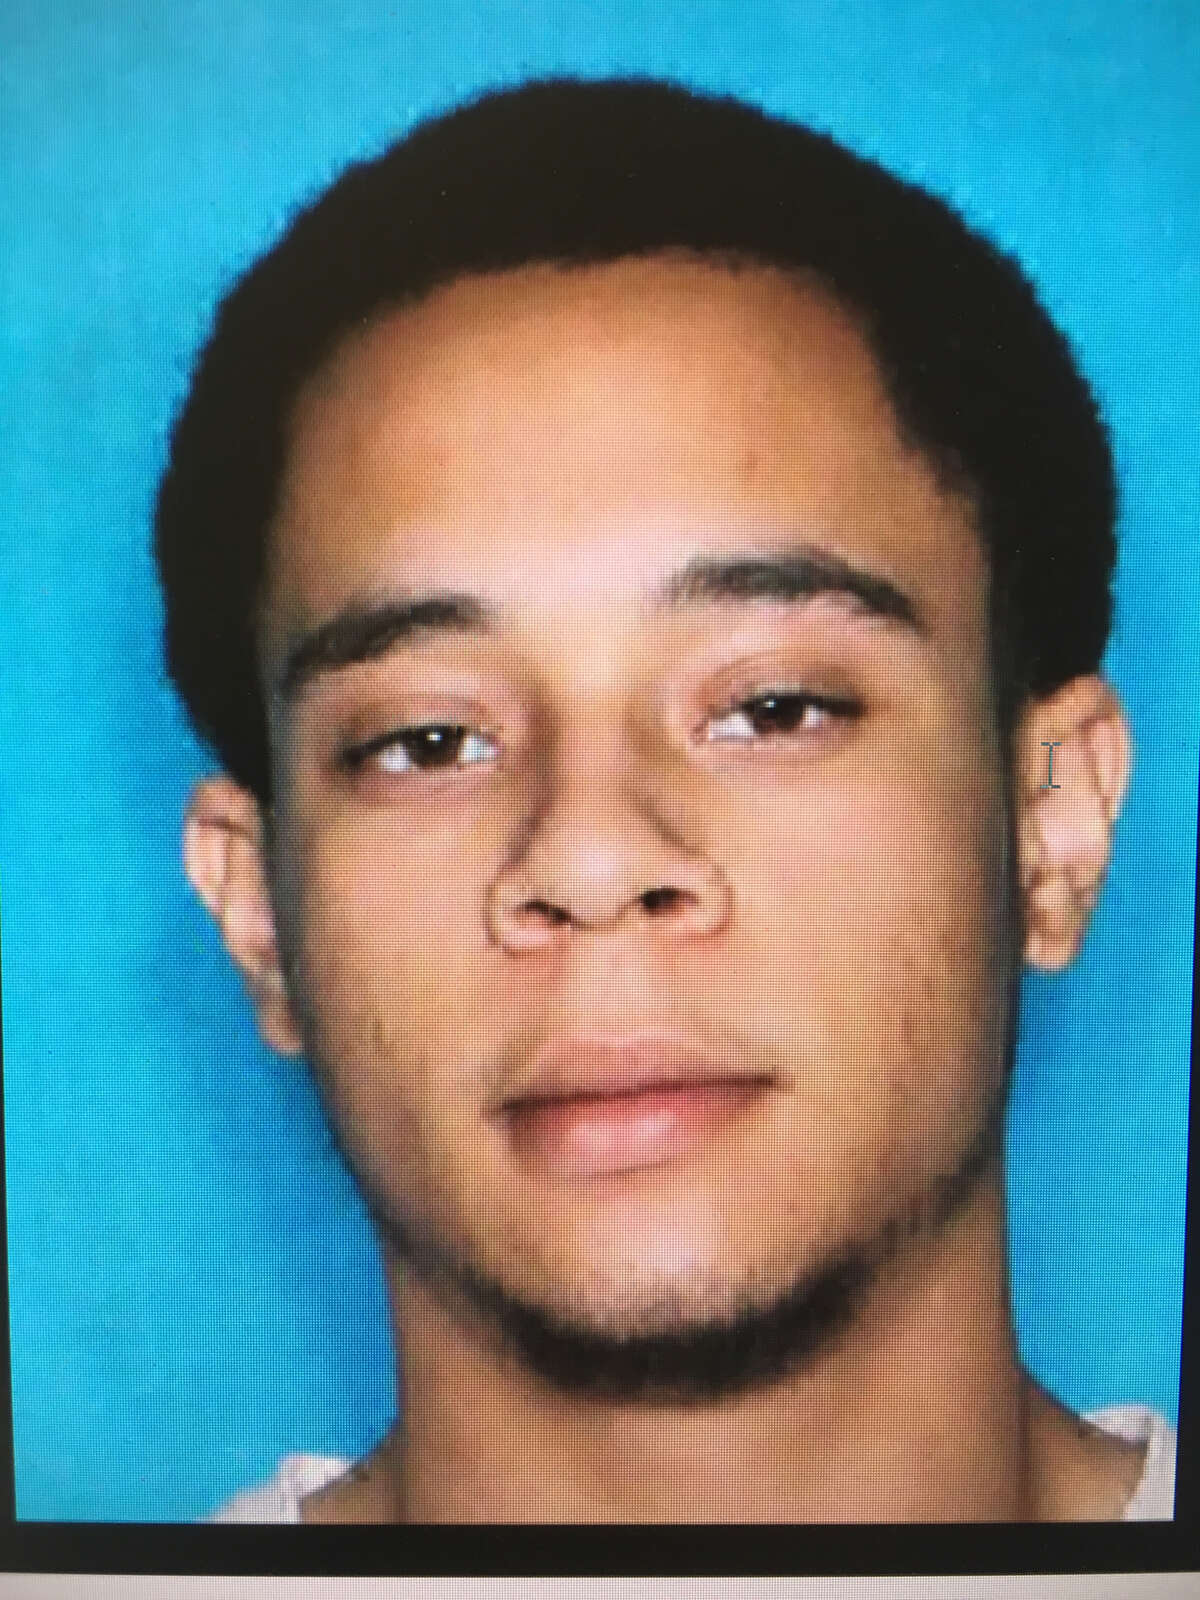 San Marcos police have issued an arrest warrant for murder for An-drew Stephen Jones, in connection to the shooting death of Nicholas Devone White, according to a news release.